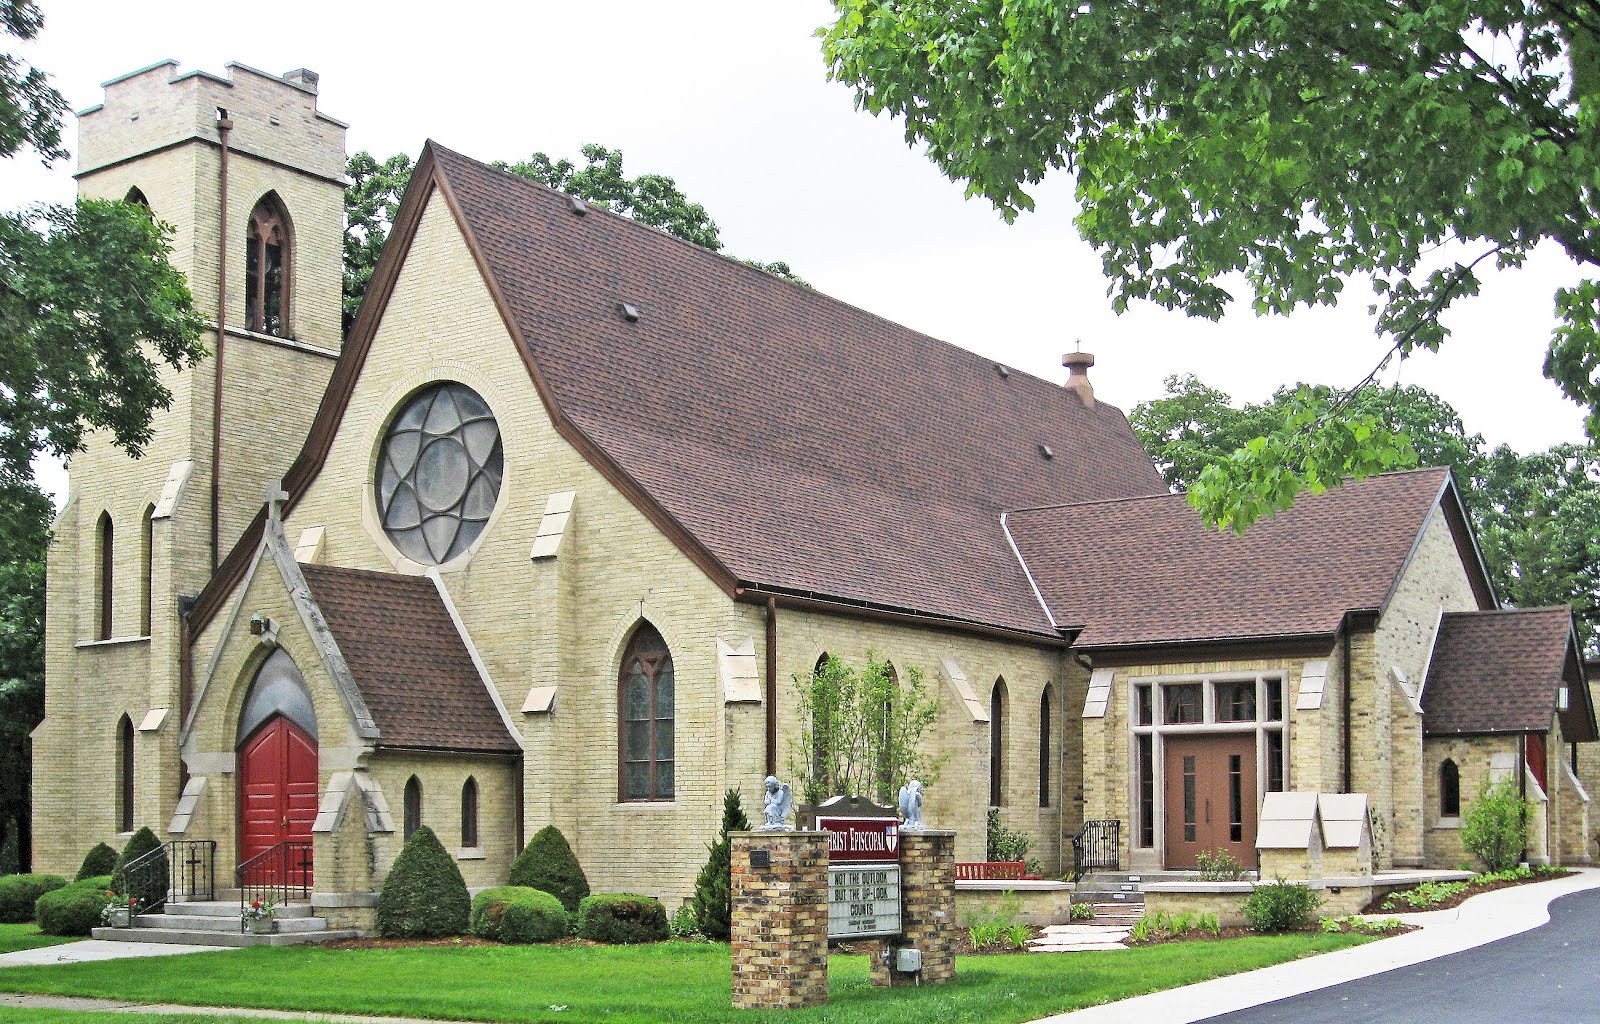 Christ Episcopal Church Welcomes You!